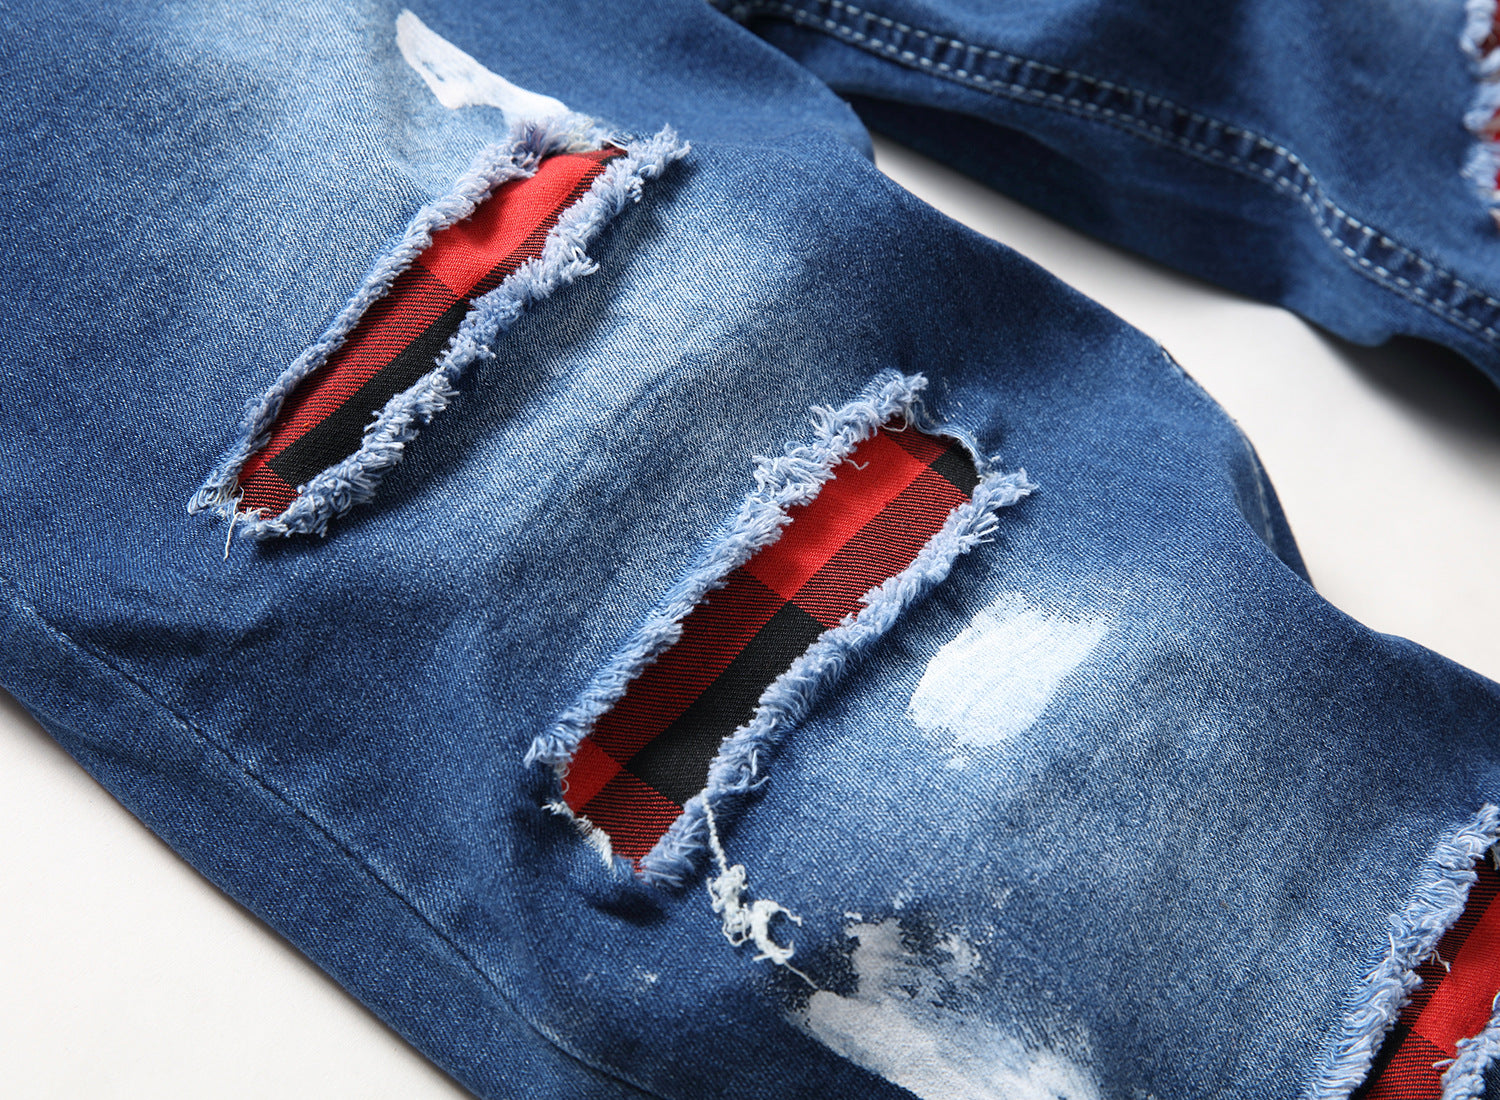 Broken Hole Embroidered Pencil jeansDescription:Closure Type: Zipper FlyApplicable Season: Four SeasonsApplicable Scene: DailyStyle: HIP HOPWaist Type: MIDDecoration: EmbroideryPattern Type: LetterMate